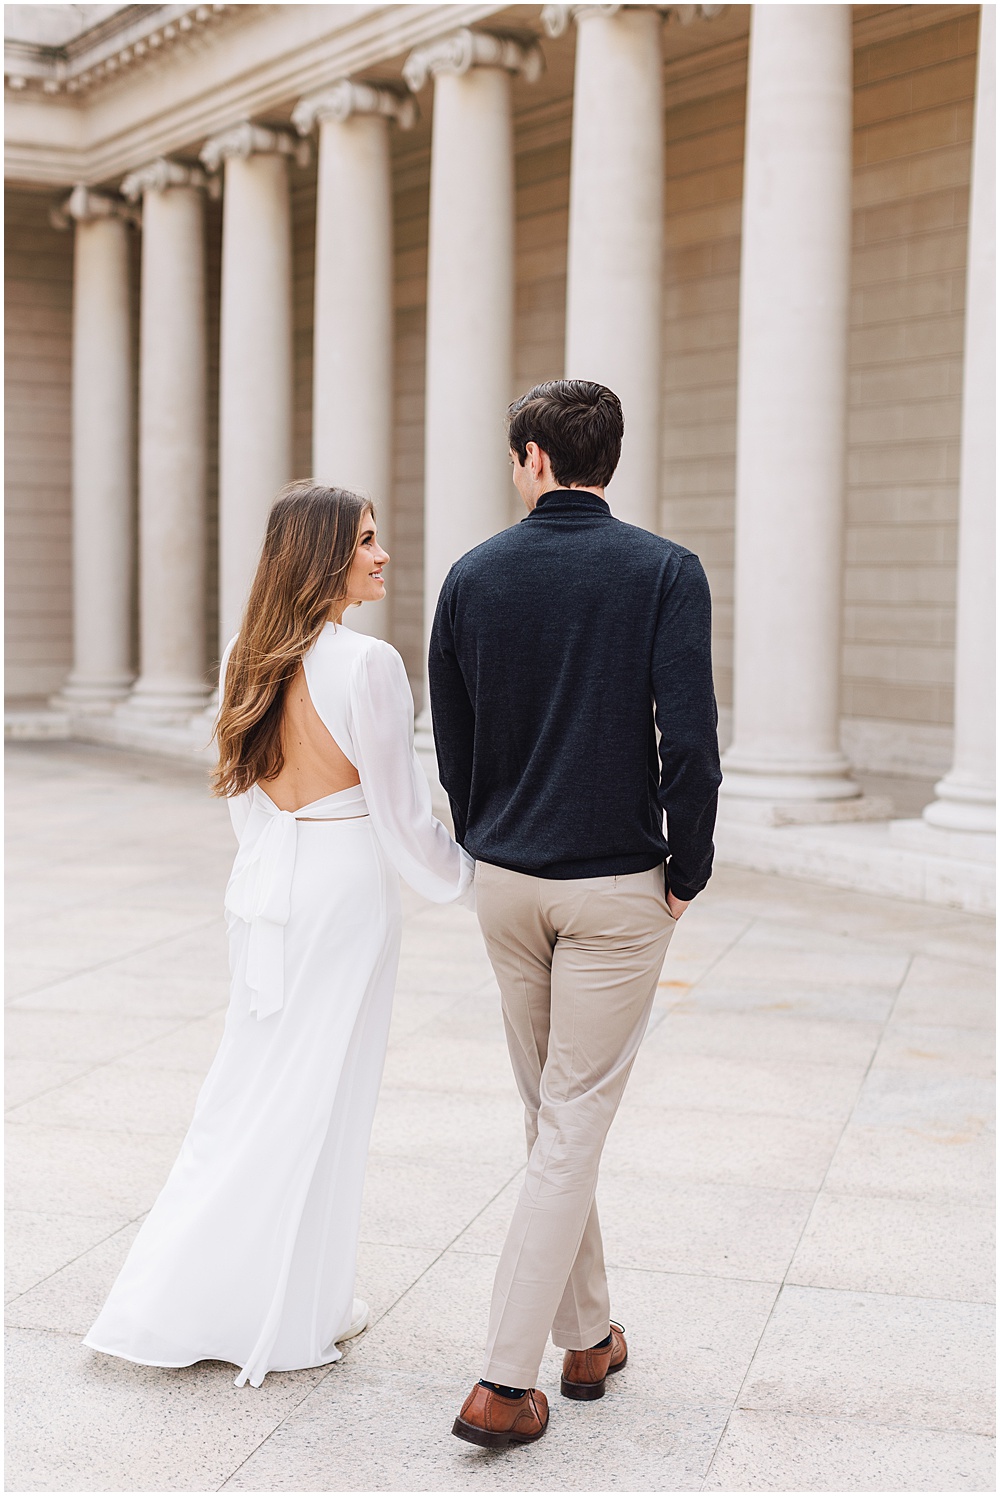 San Francisco Engagement at Legion of Honor and Chrissy Field Beach | Laurier + Griffin